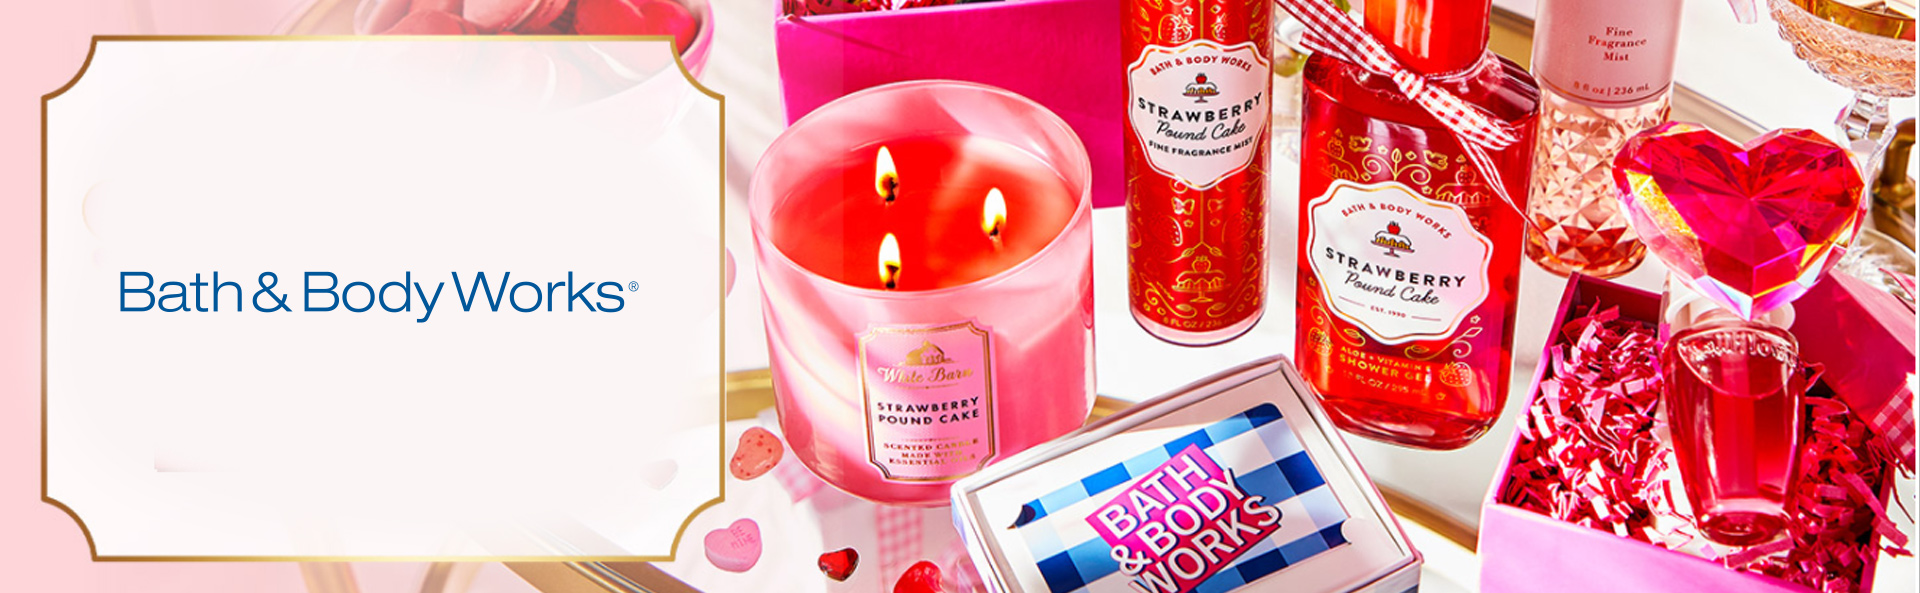 bath and body works banner picture